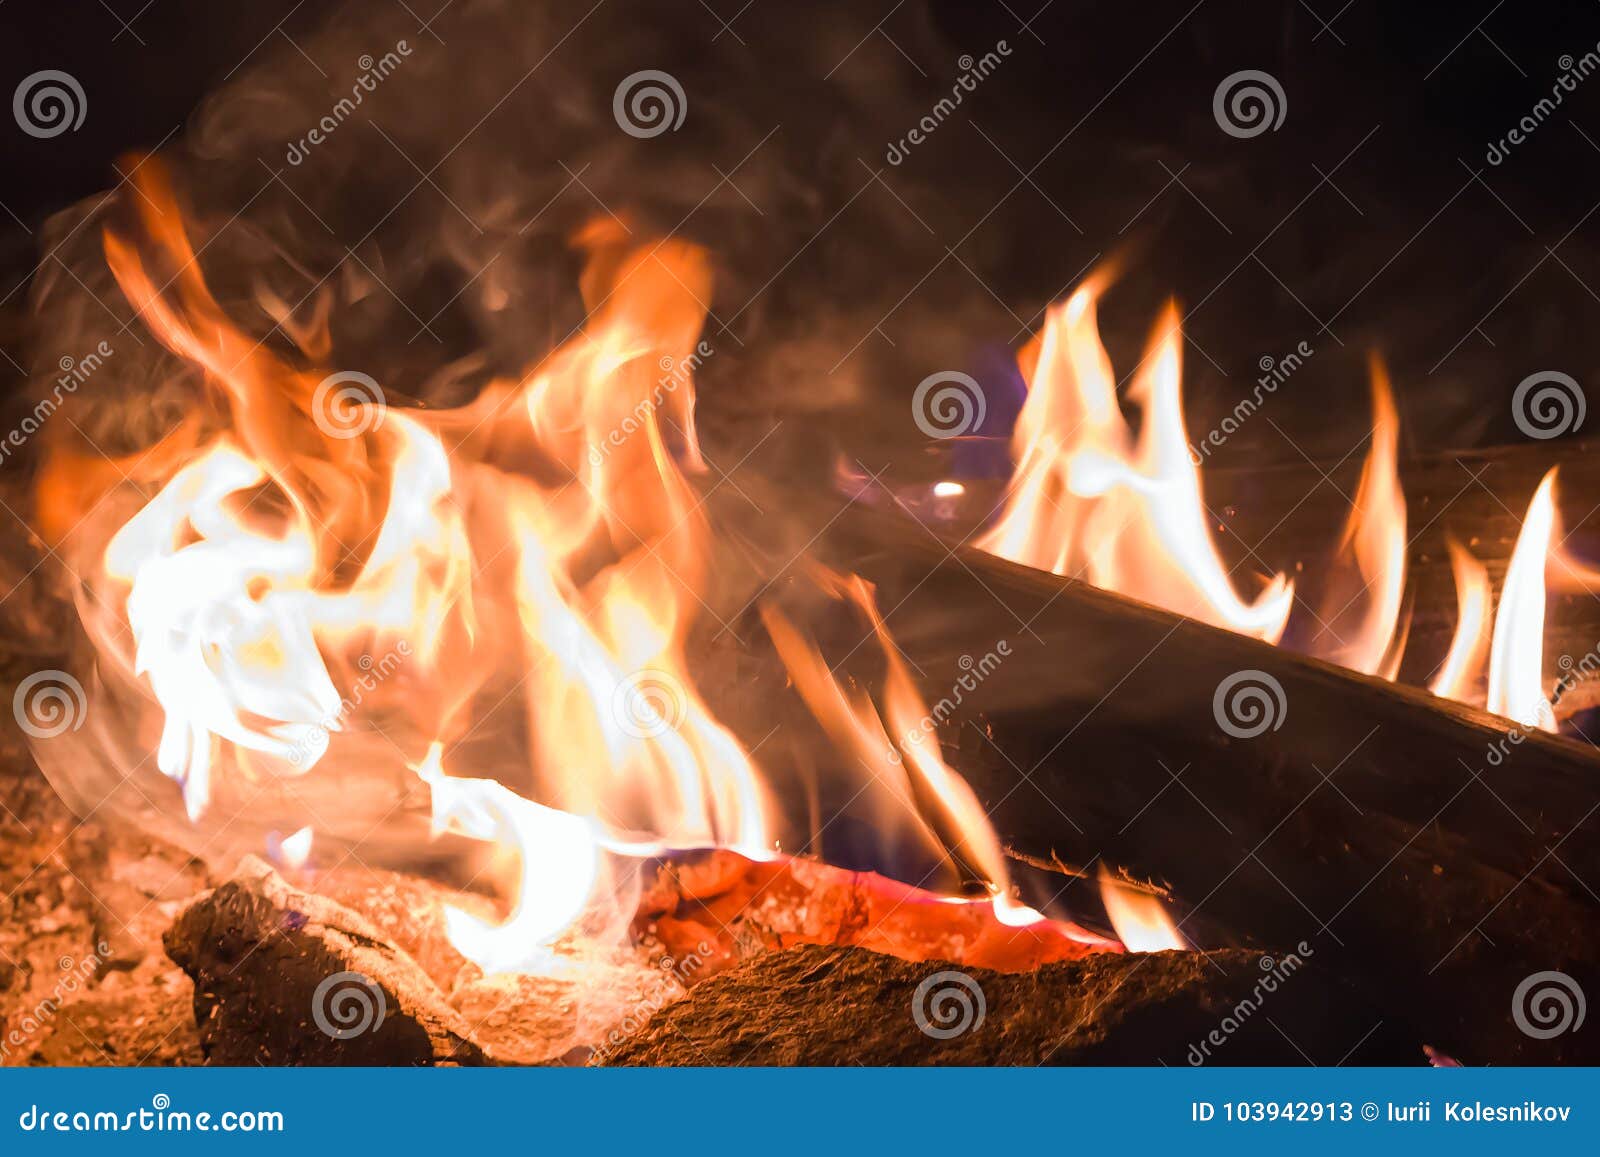 Fire at Night. a Burning Campfire Stock Image - Image of coal, abstract ...